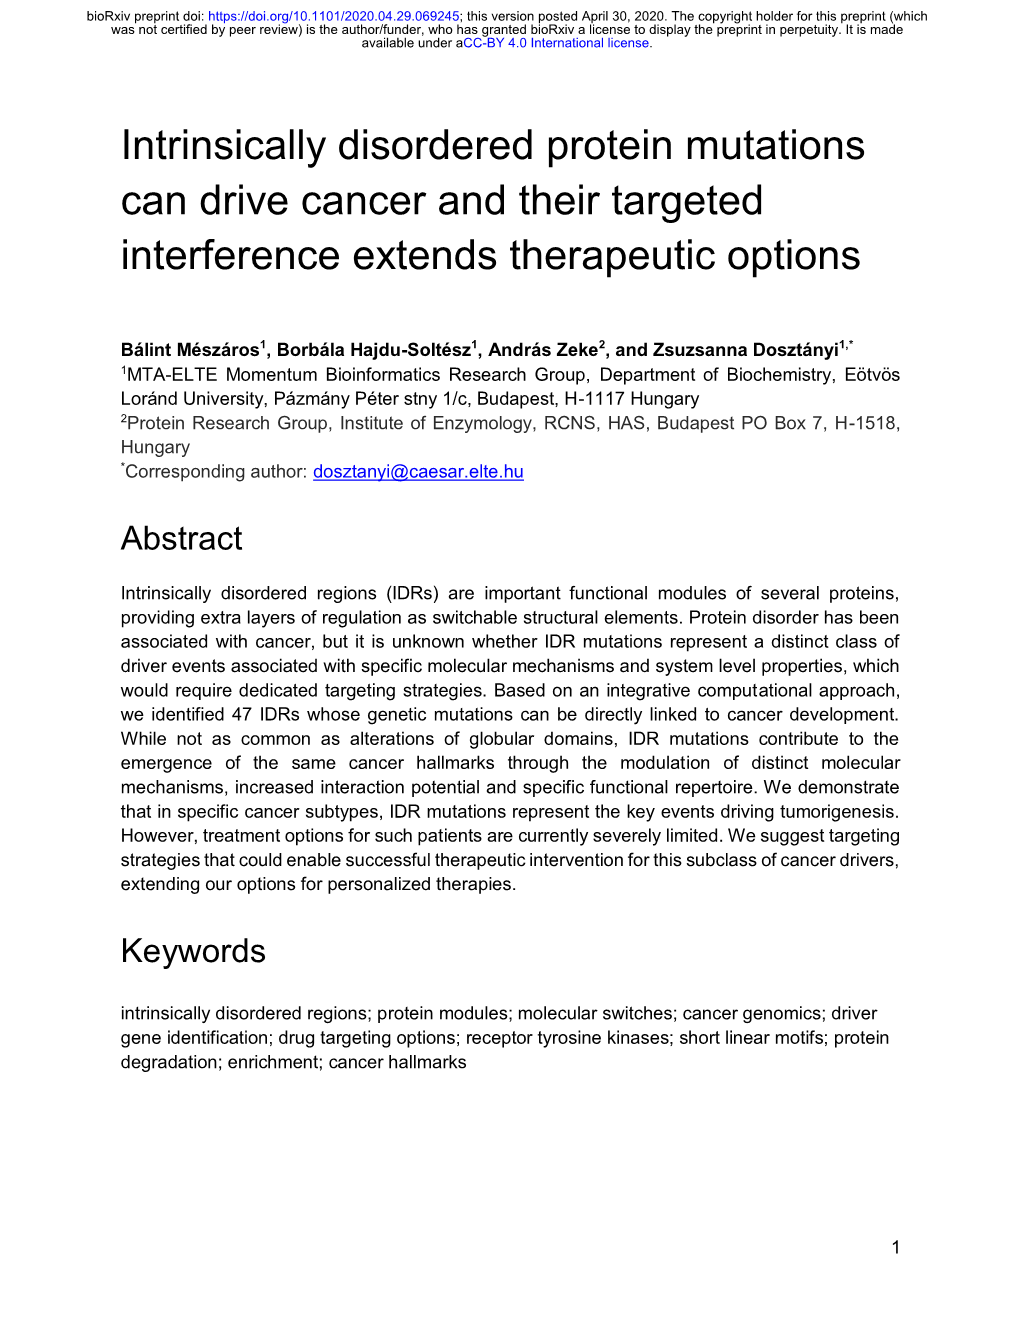 Intrinsically Disordered Protein Mutations Can Drive Cancer and Their Targeted Interference Extends Therapeutic Options